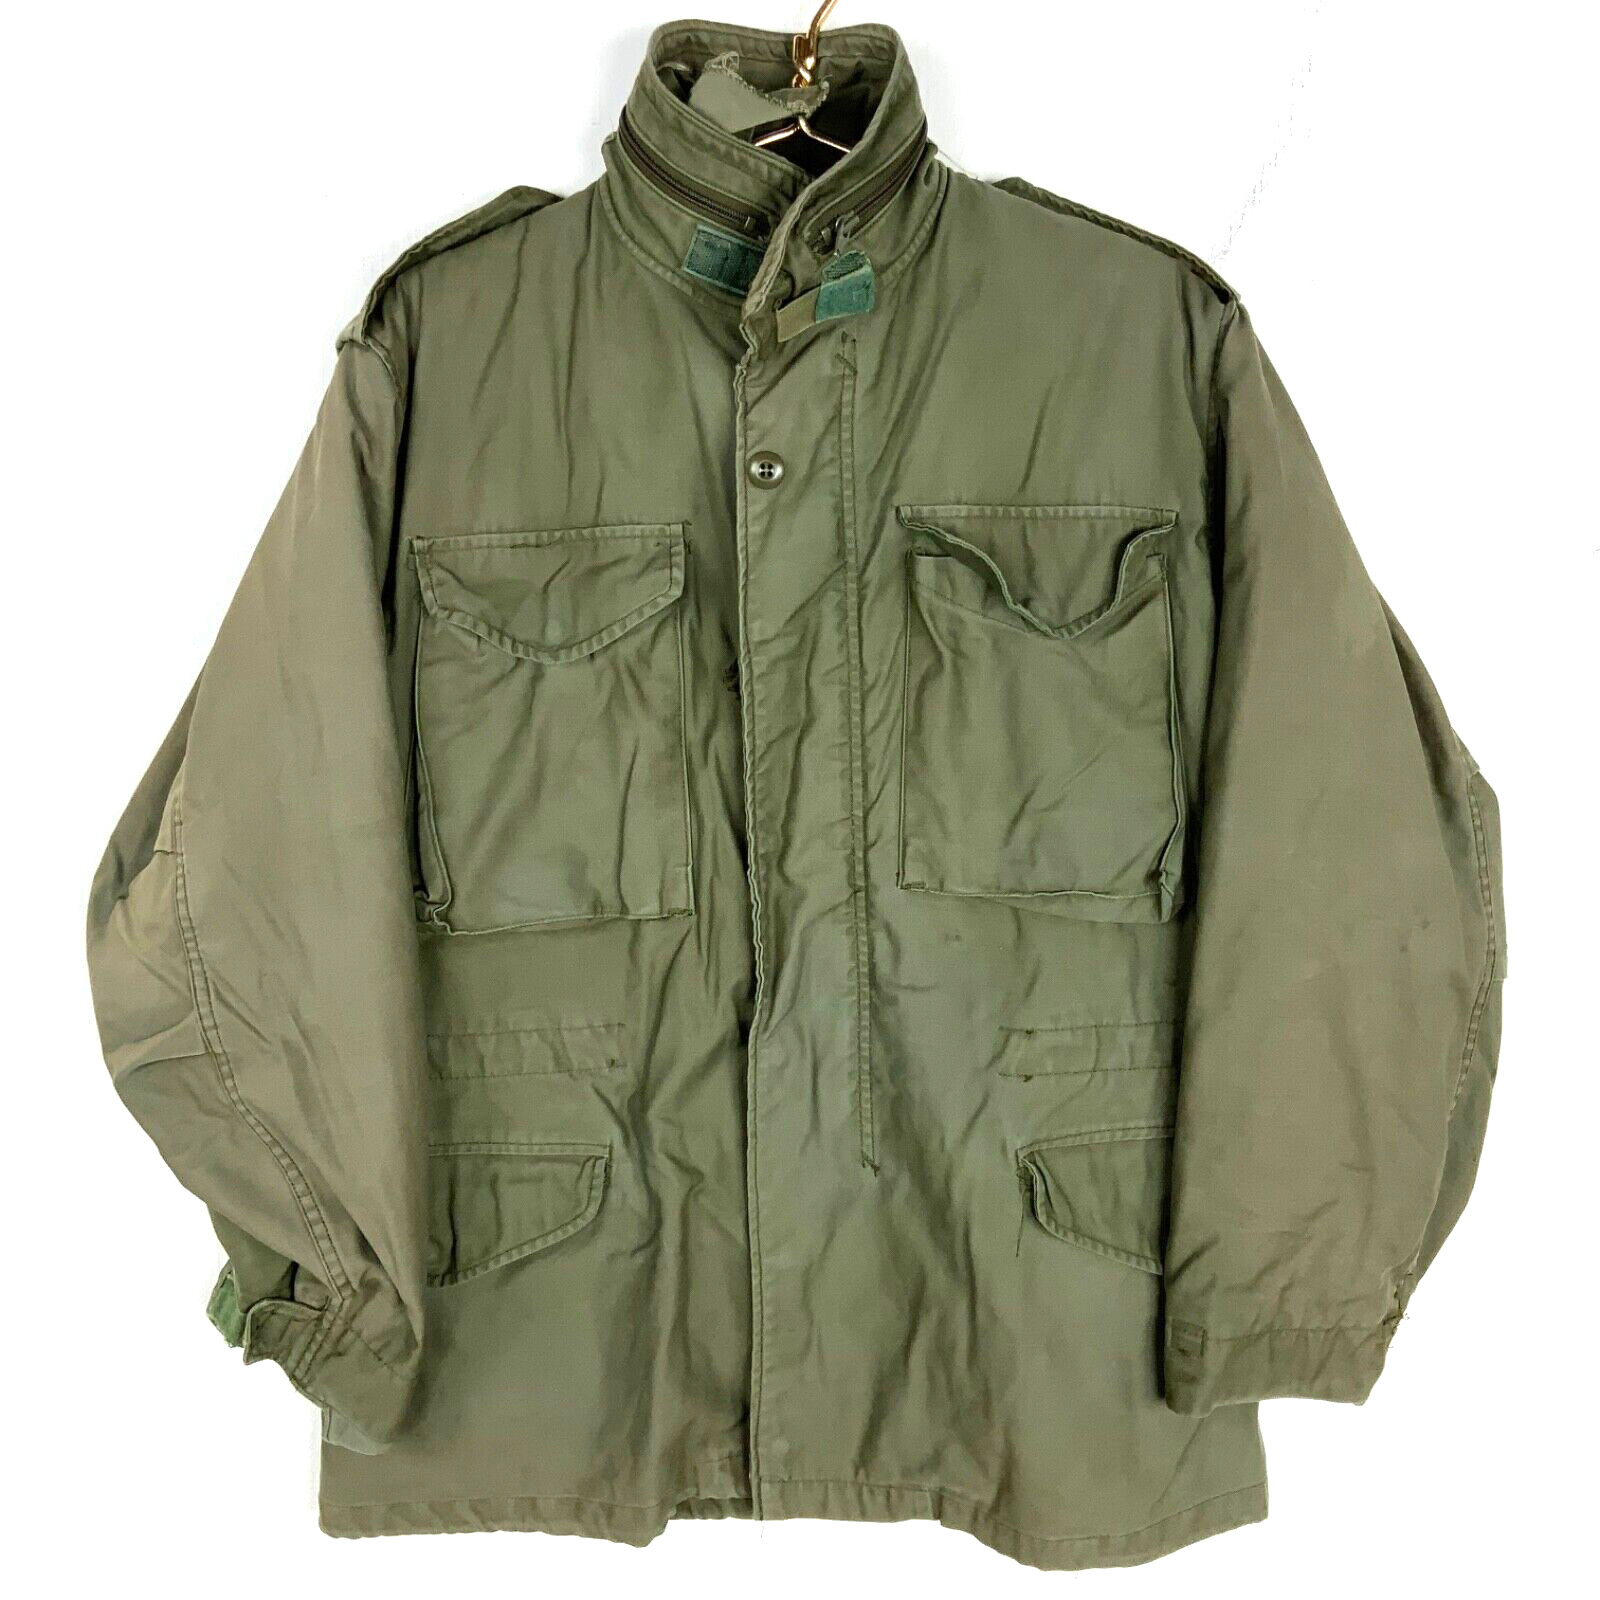 Vintage Military Og 107 Field Jacket Lined Size Small Green 1984 80s